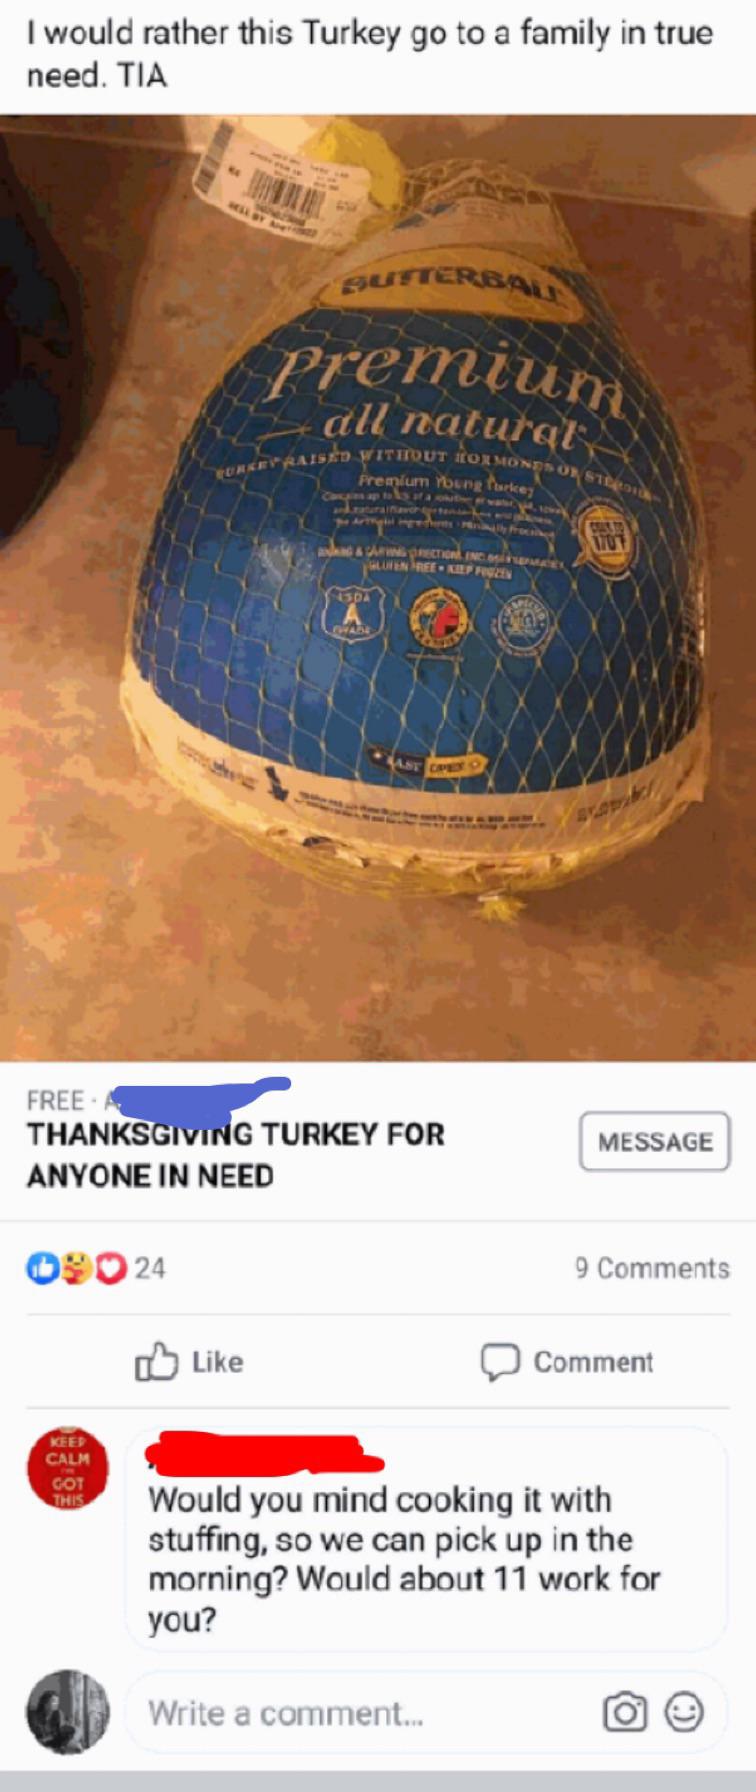 entitled people - Premium I would rather this Turkey go to a family in true need. Tia Eurket Raised Vitinut On Monsson Sted Premium Young Parkey nawe Son Butterbau 1707 & Arrection Income Guren Tree Refren Soda Free Thanksgiving Turkey For Anyone In Need 